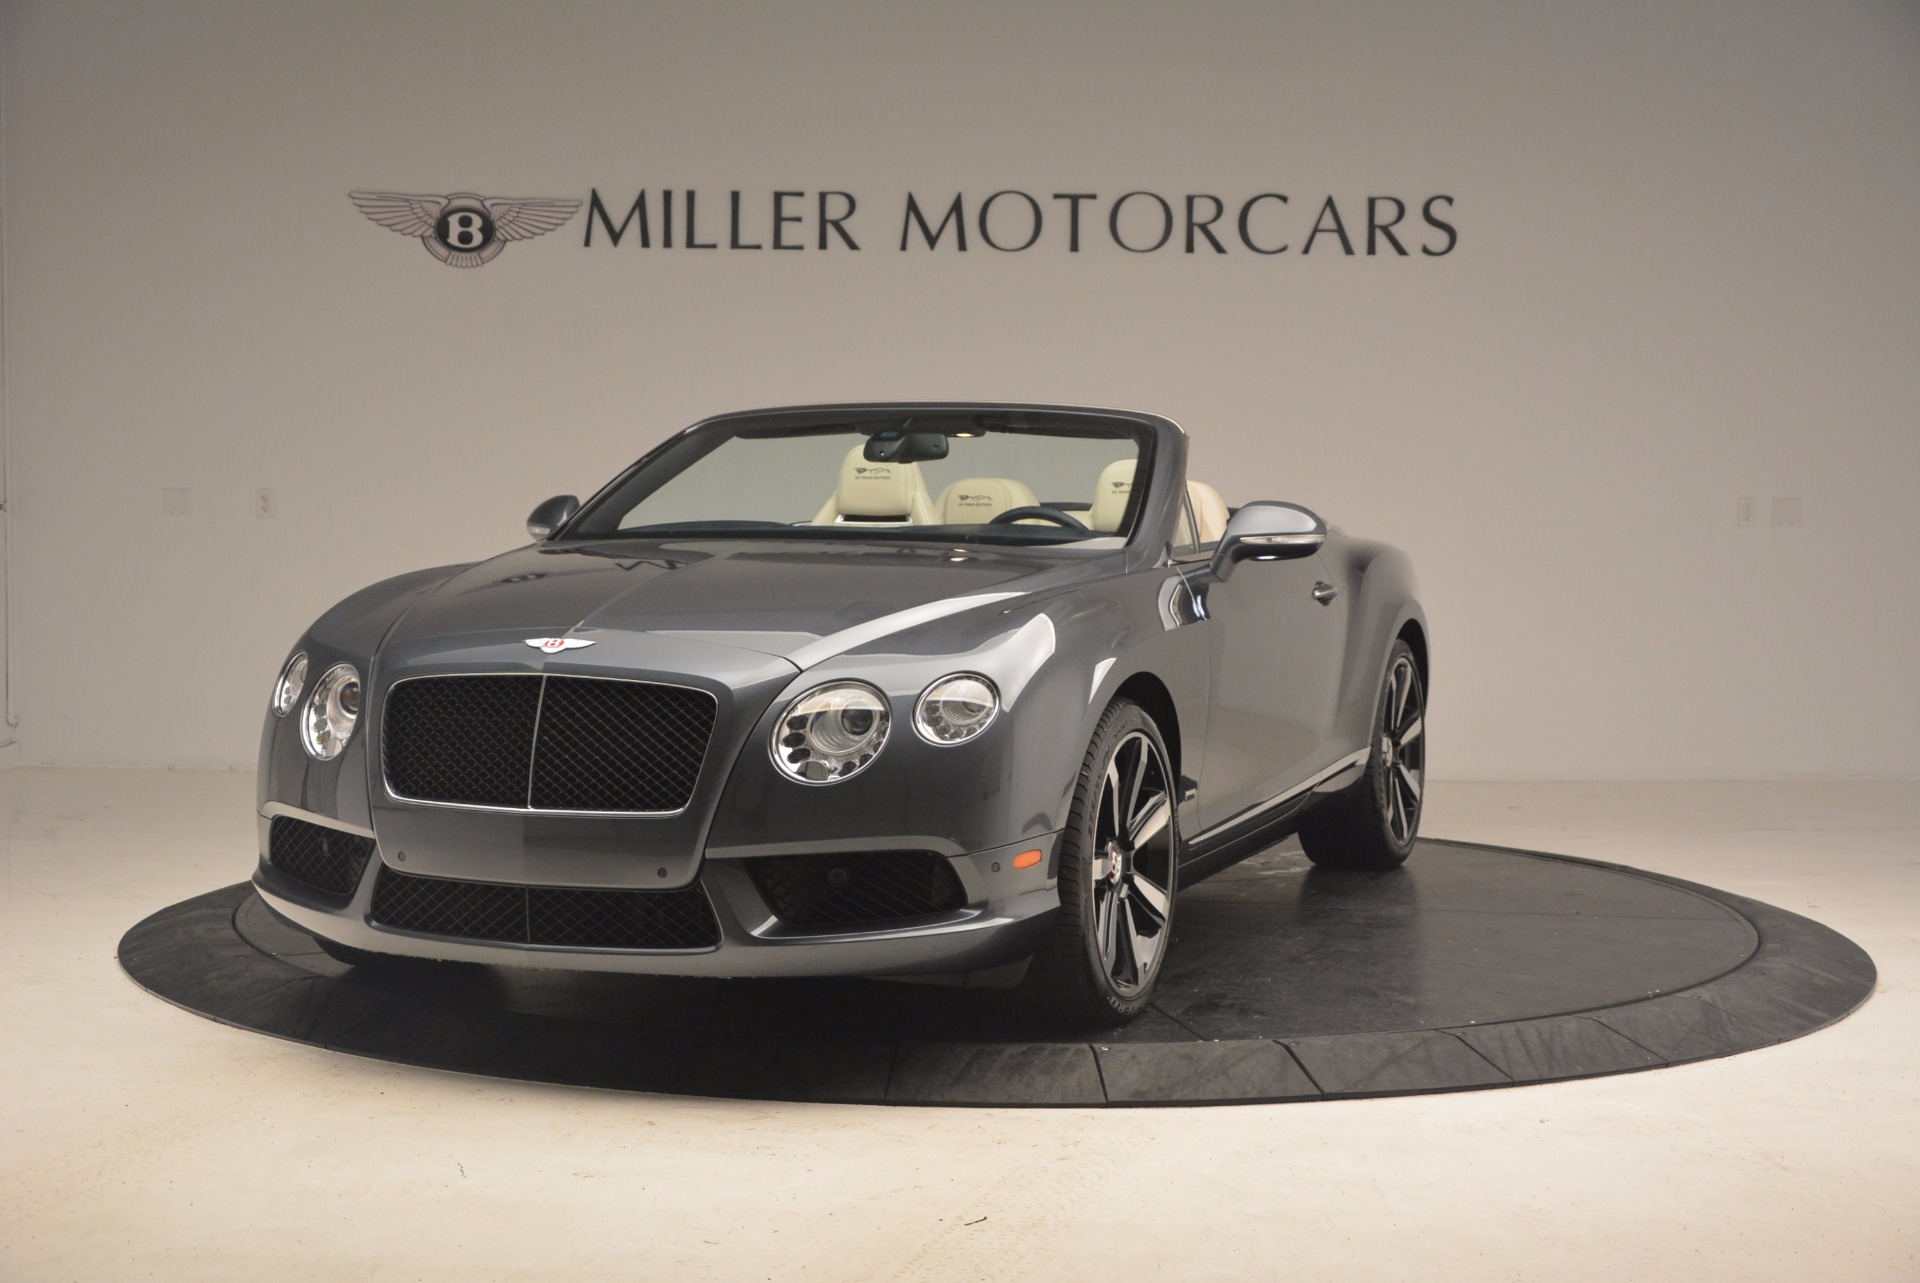 Used 2013 Bentley Continental GT V8 Le Mans Edition, 1 of 48 for sale Sold at Bugatti of Greenwich in Greenwich CT 06830 1